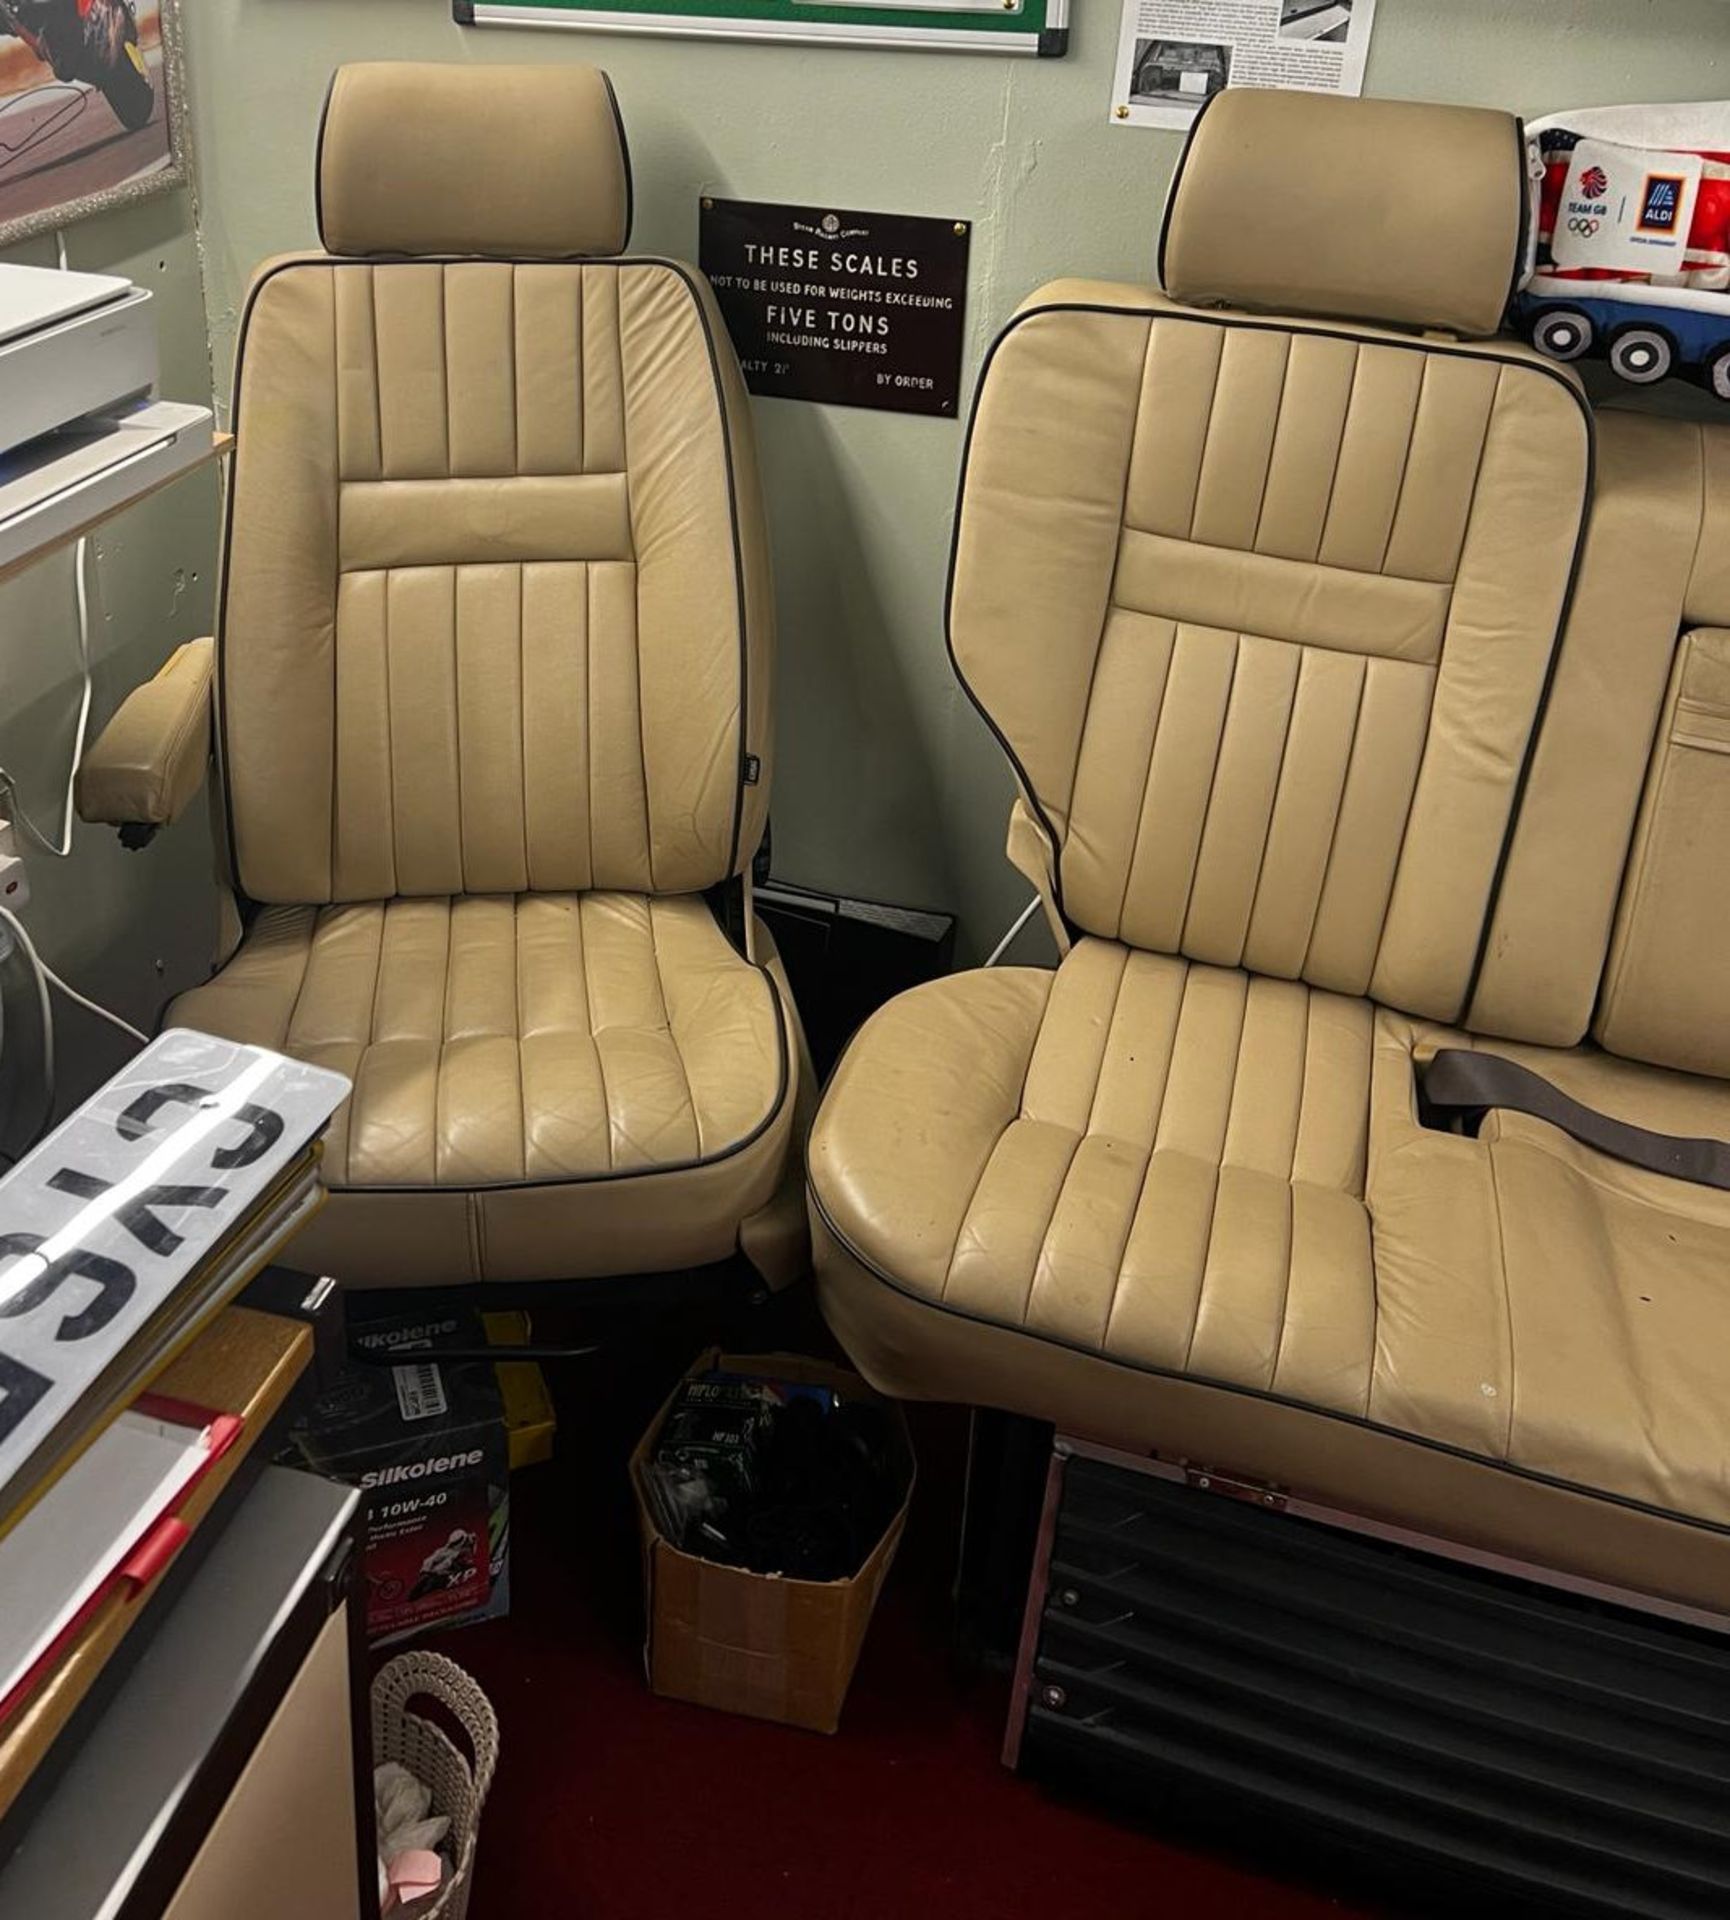 Bespoke Range Rover P38 1999 Seating - For Man Cave/Den - CL027 - NO VAT ON THE HAMMER - Location: - Image 8 of 8